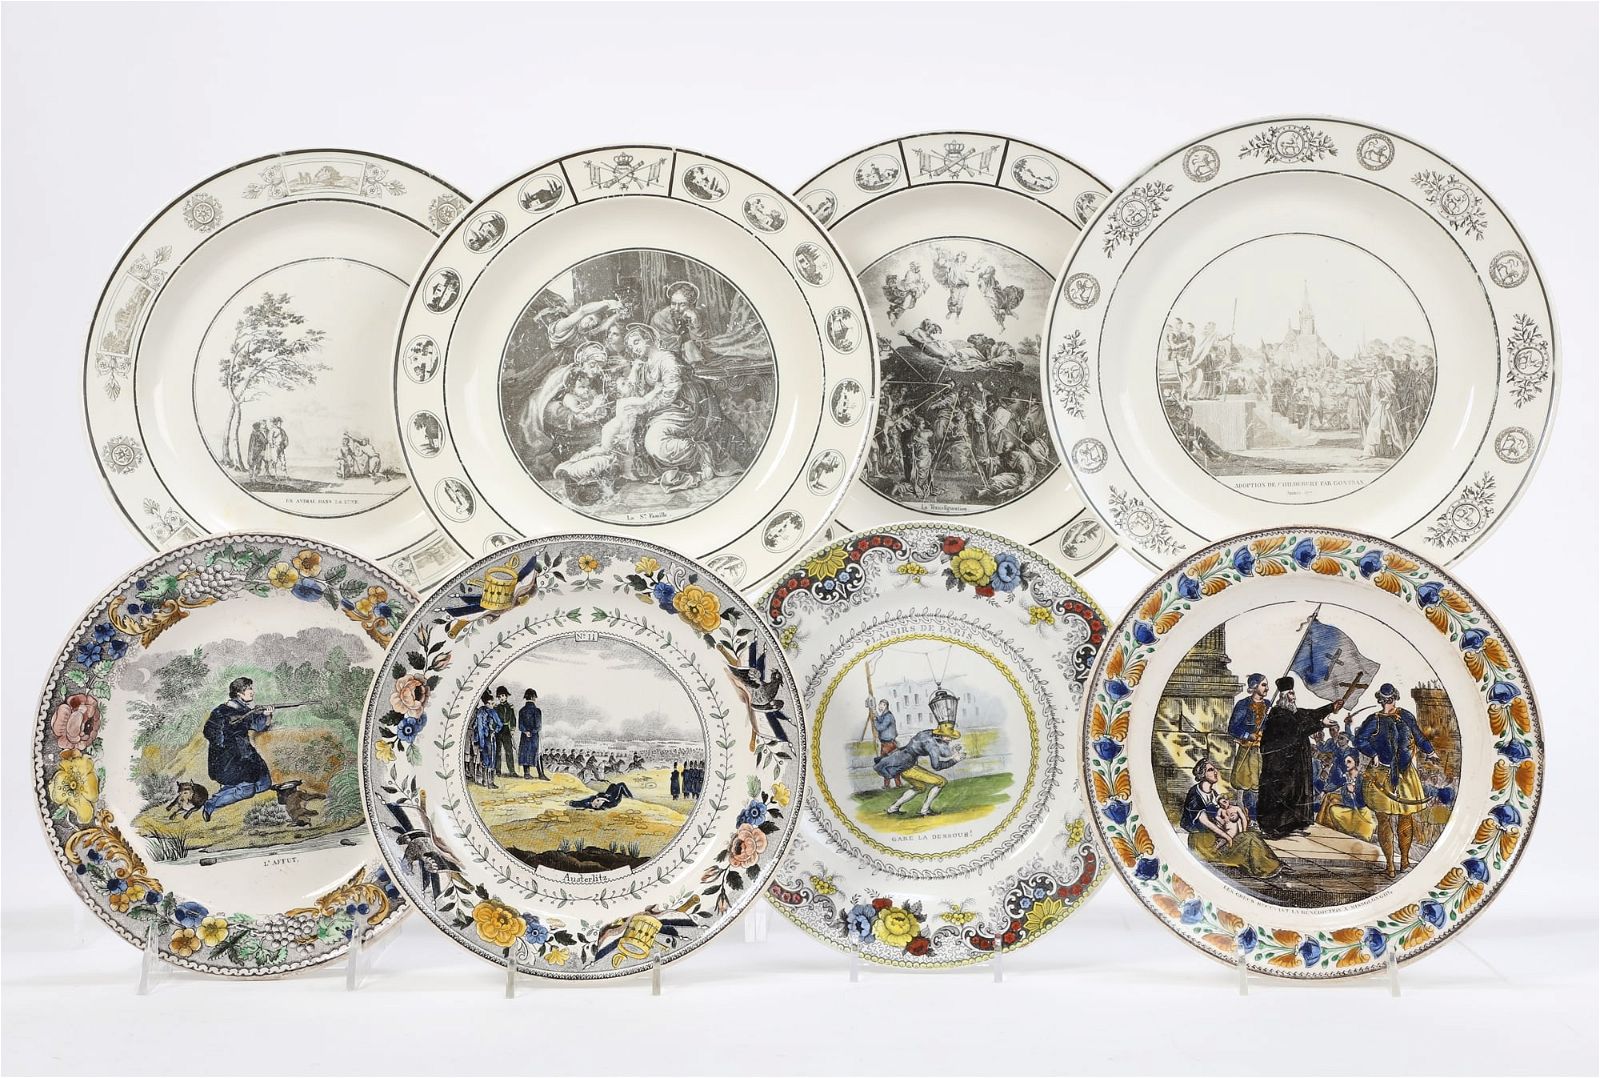 20 FRENCH TRANSFER PRINTED EARTHENWARE